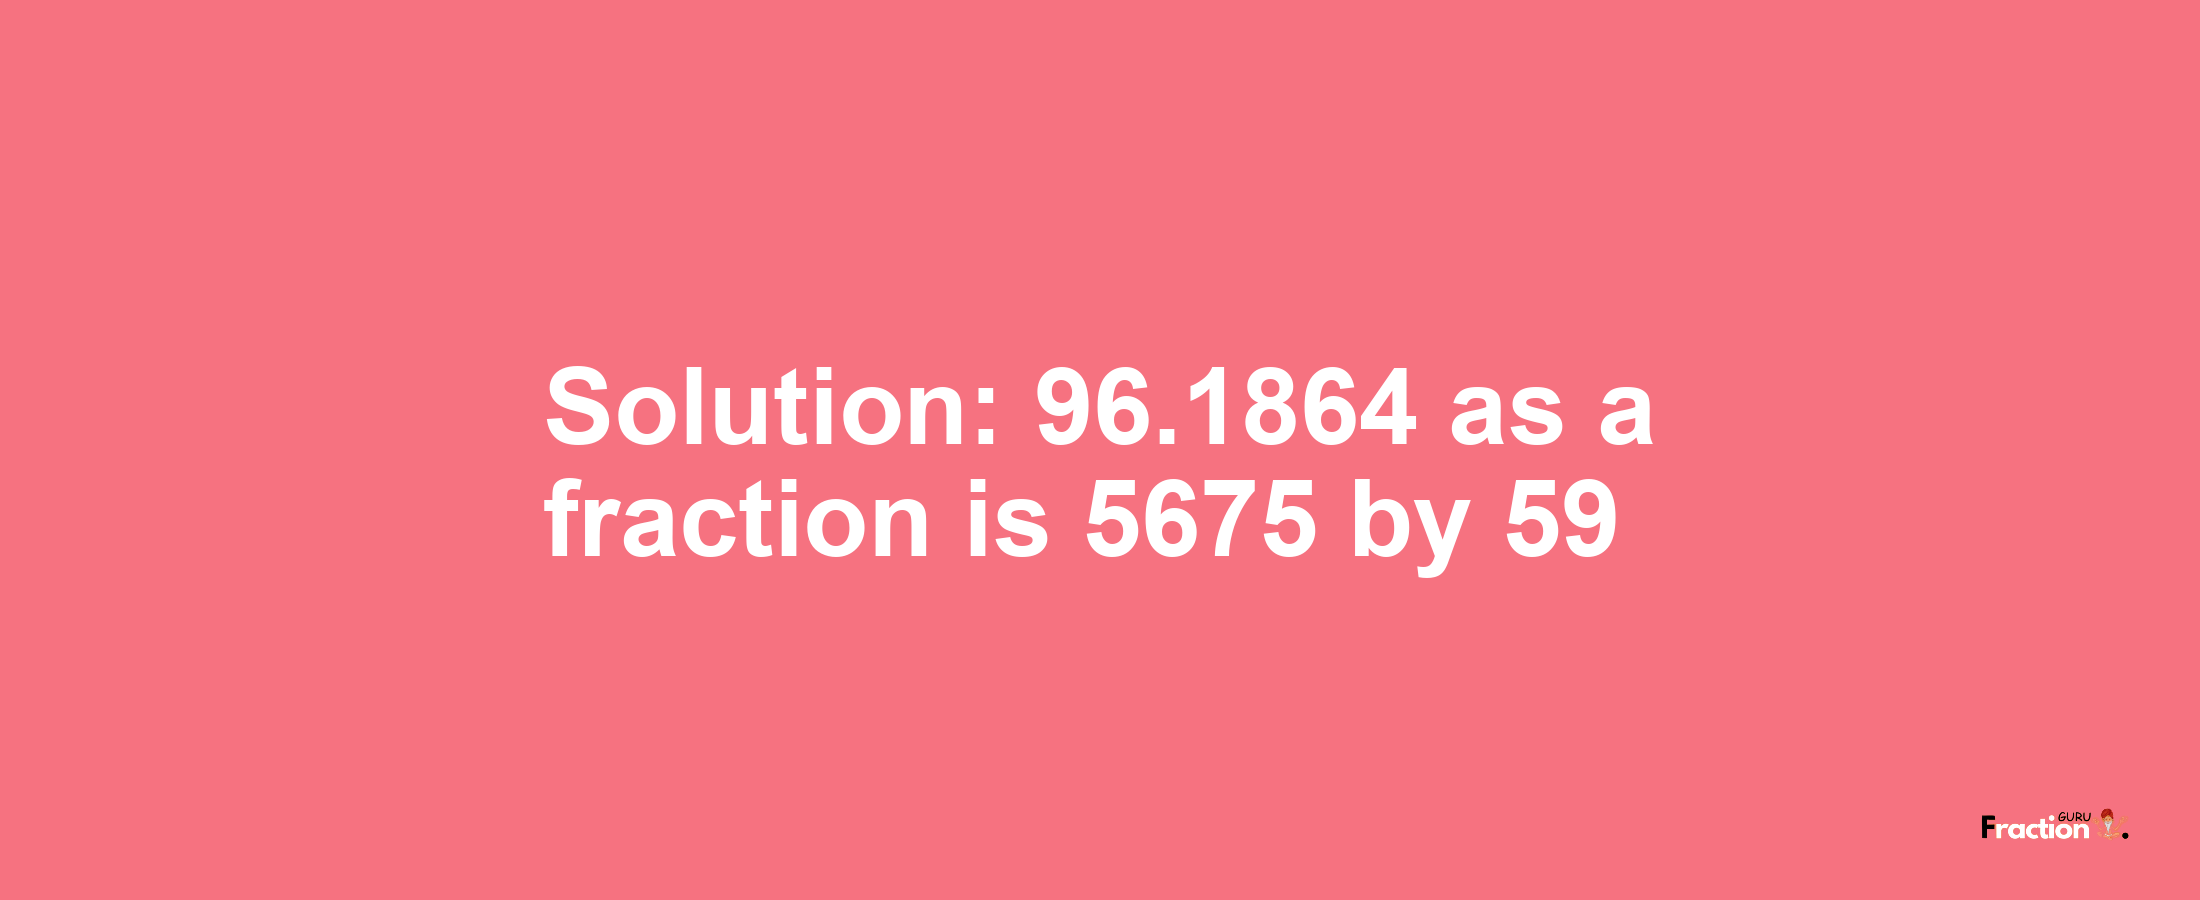 Solution:96.1864 as a fraction is 5675/59